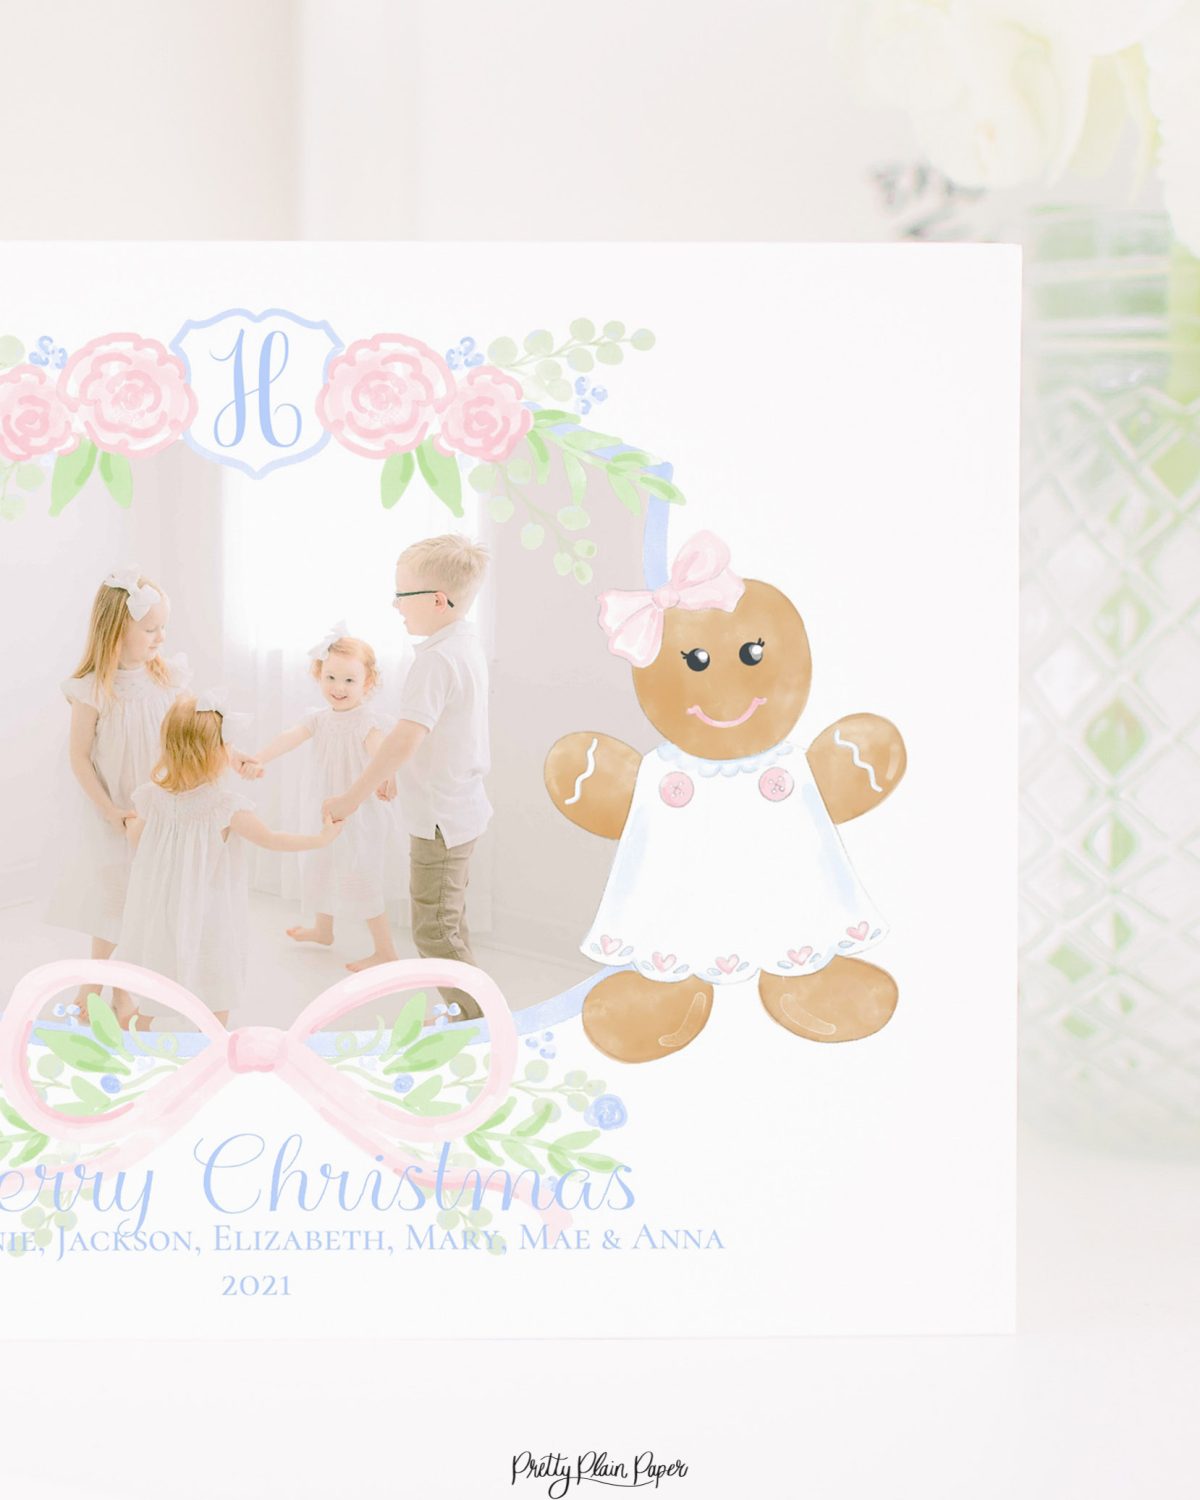 Watercolor Christmas Card with Photo by Pretty Plain Paper a Grandmillennial Christmas Card with Blue Gingerbread Boy and Pink Gingerbread Girl and Monogram Crest